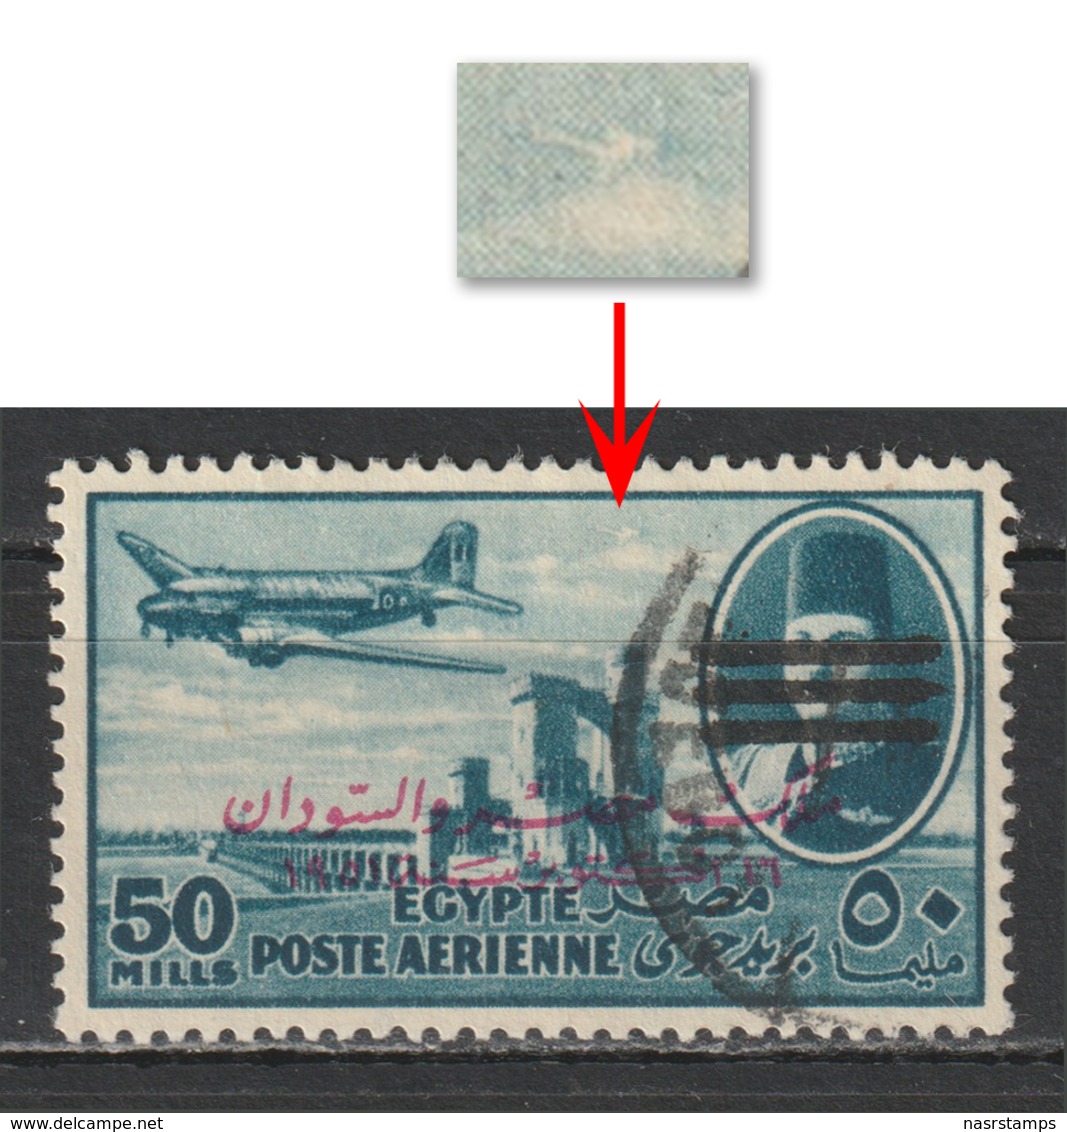 Egypt - 1953 - Rare - King Farouk - E & S - 3 Bars - 50 M - In The Sky - Used - Nile Post Catalog ( A72a8 ) - Unused Stamps